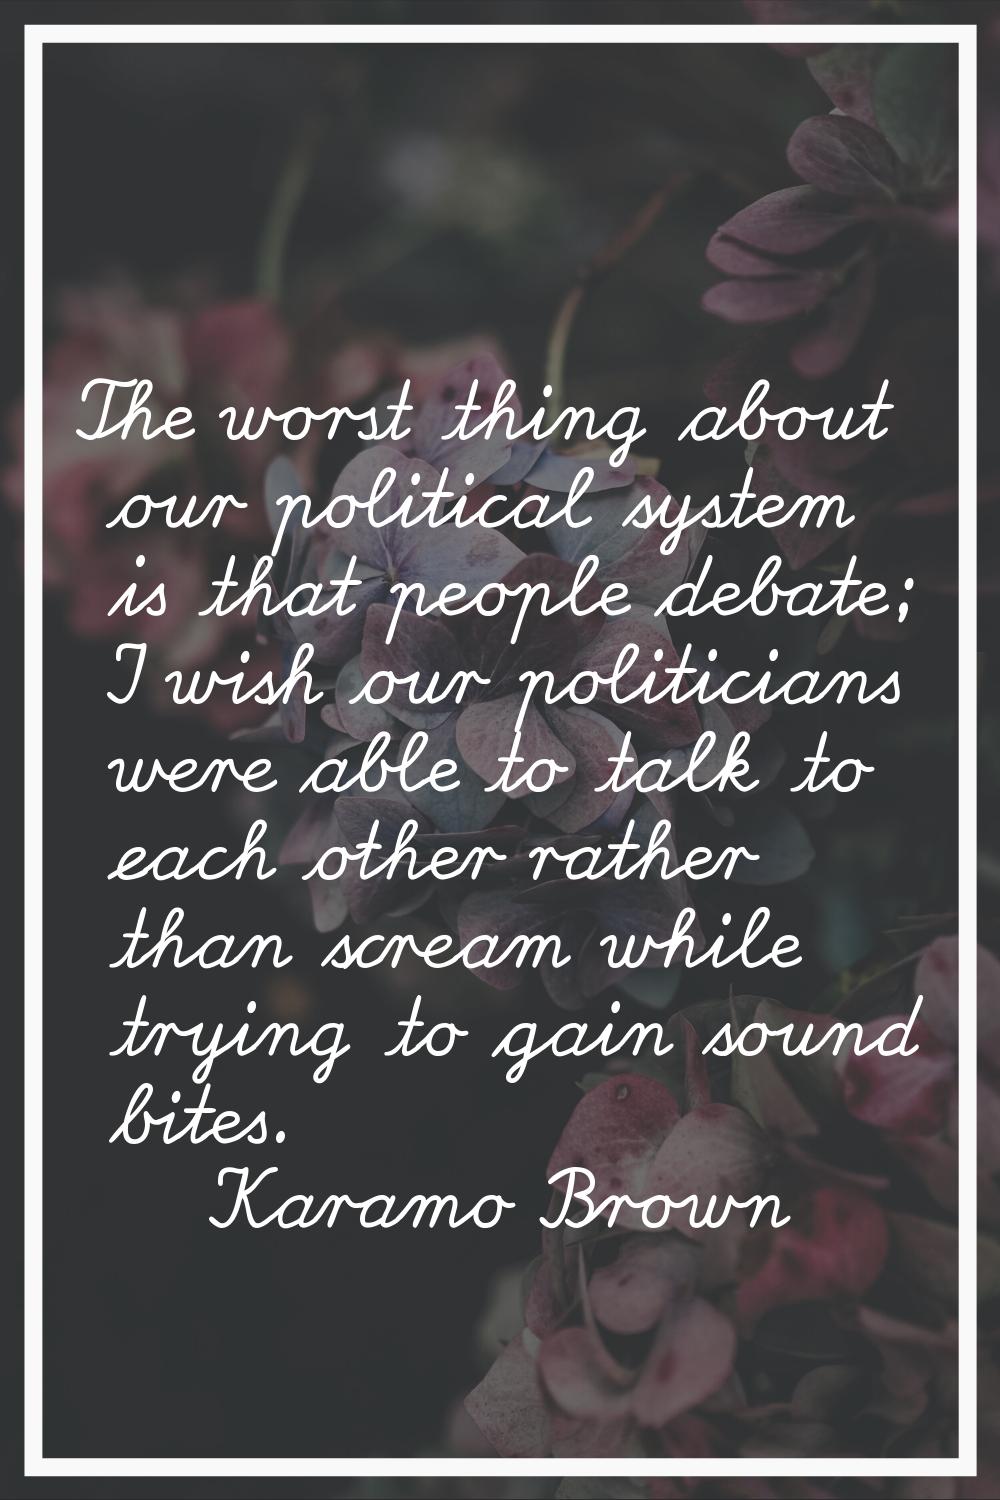 The worst thing about our political system is that people debate; I wish our politicians were able 